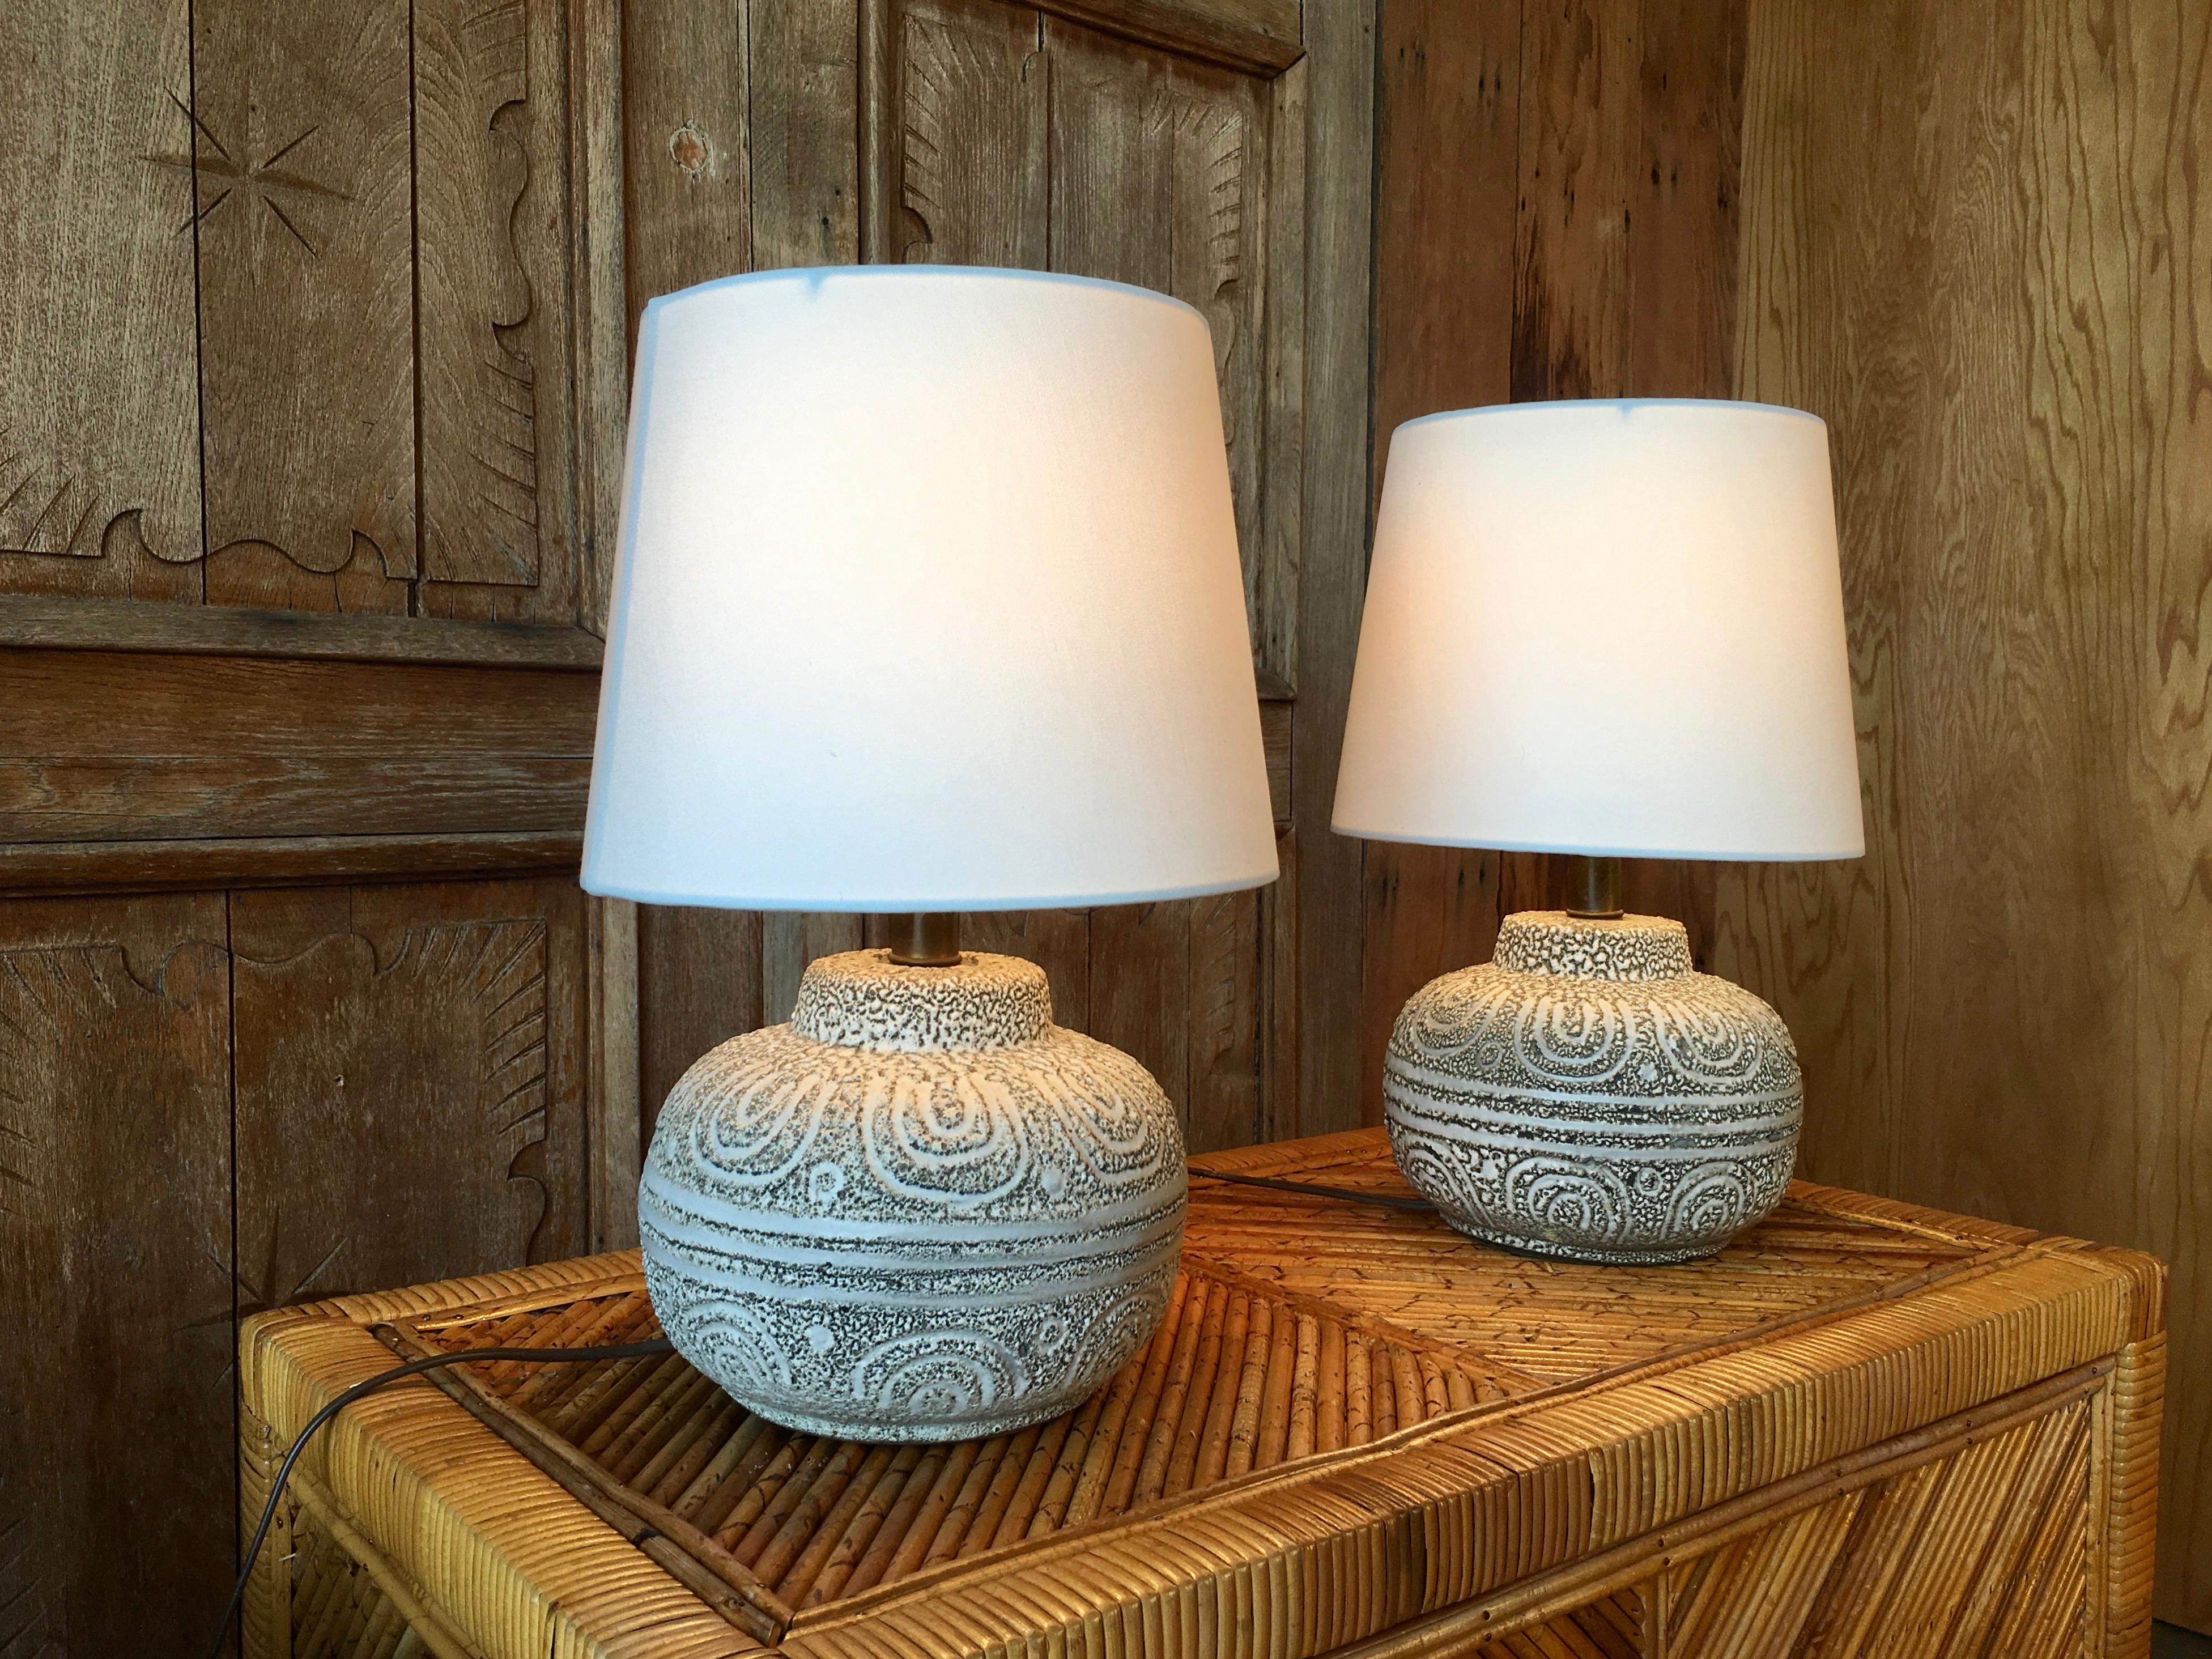 Pair of Danish sculpted glazed pottery lamps in grey and oatmeal color. Lampshades are new and included.